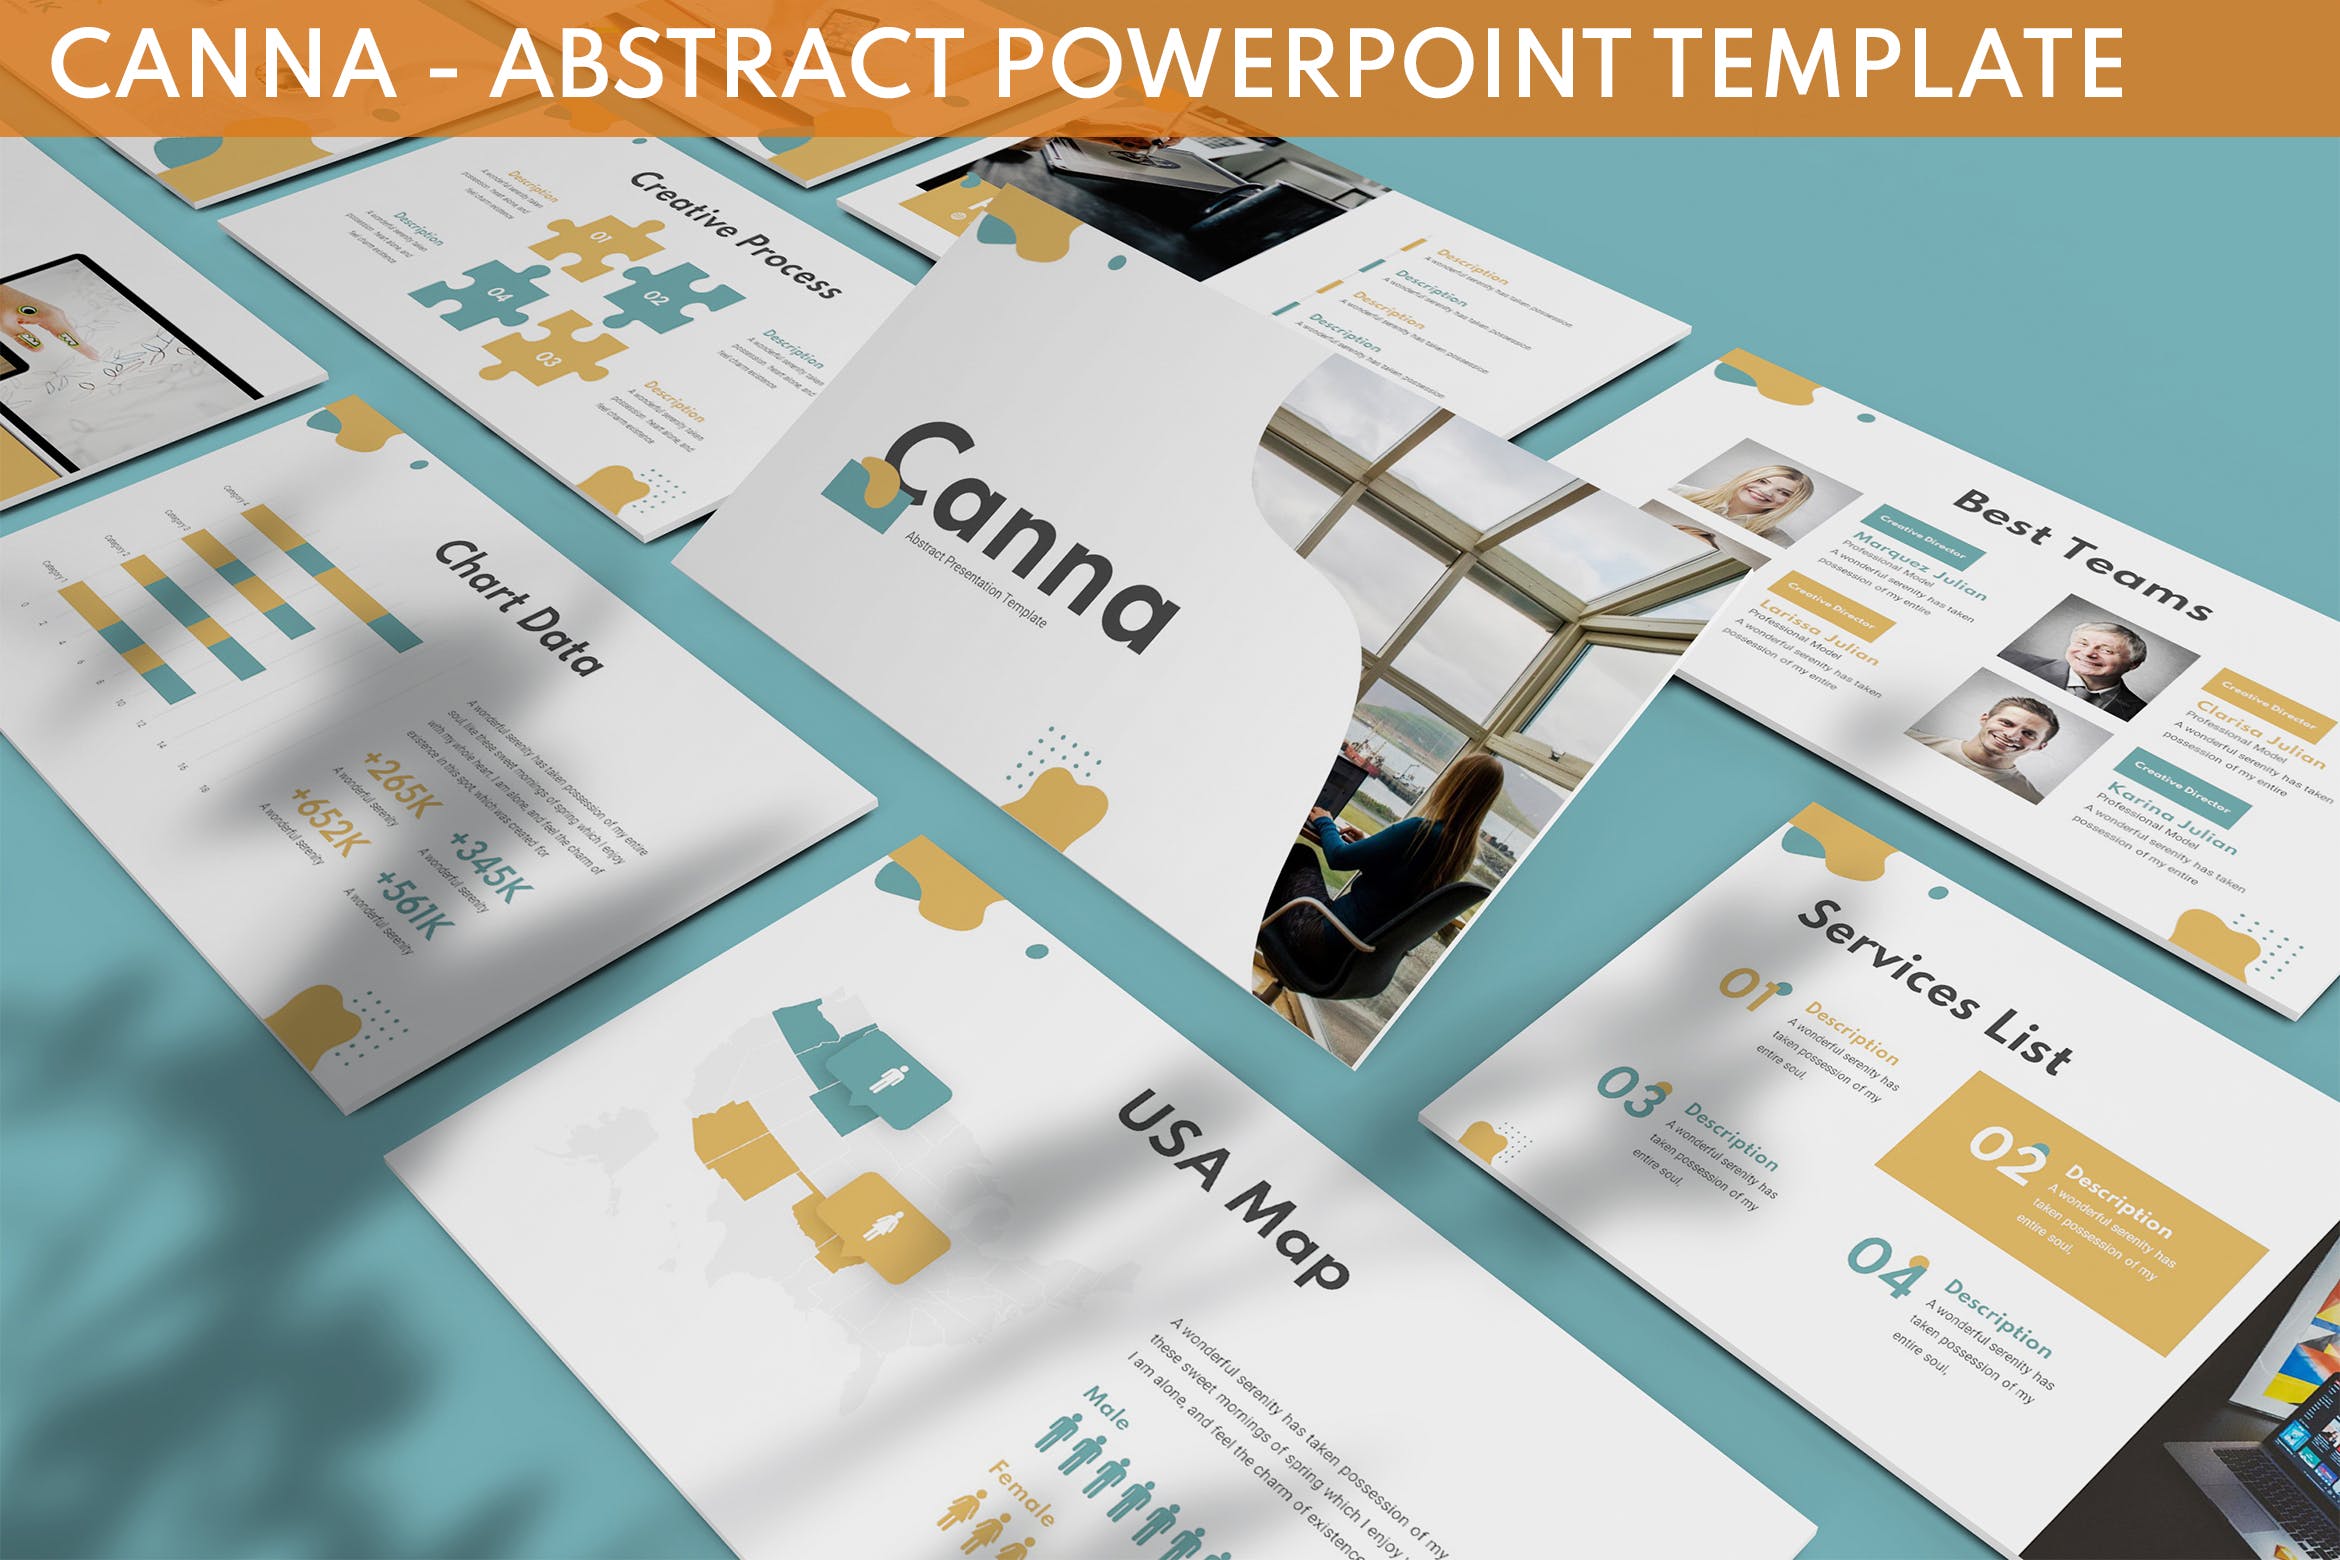 Canna - Abstract Powerpoint Template